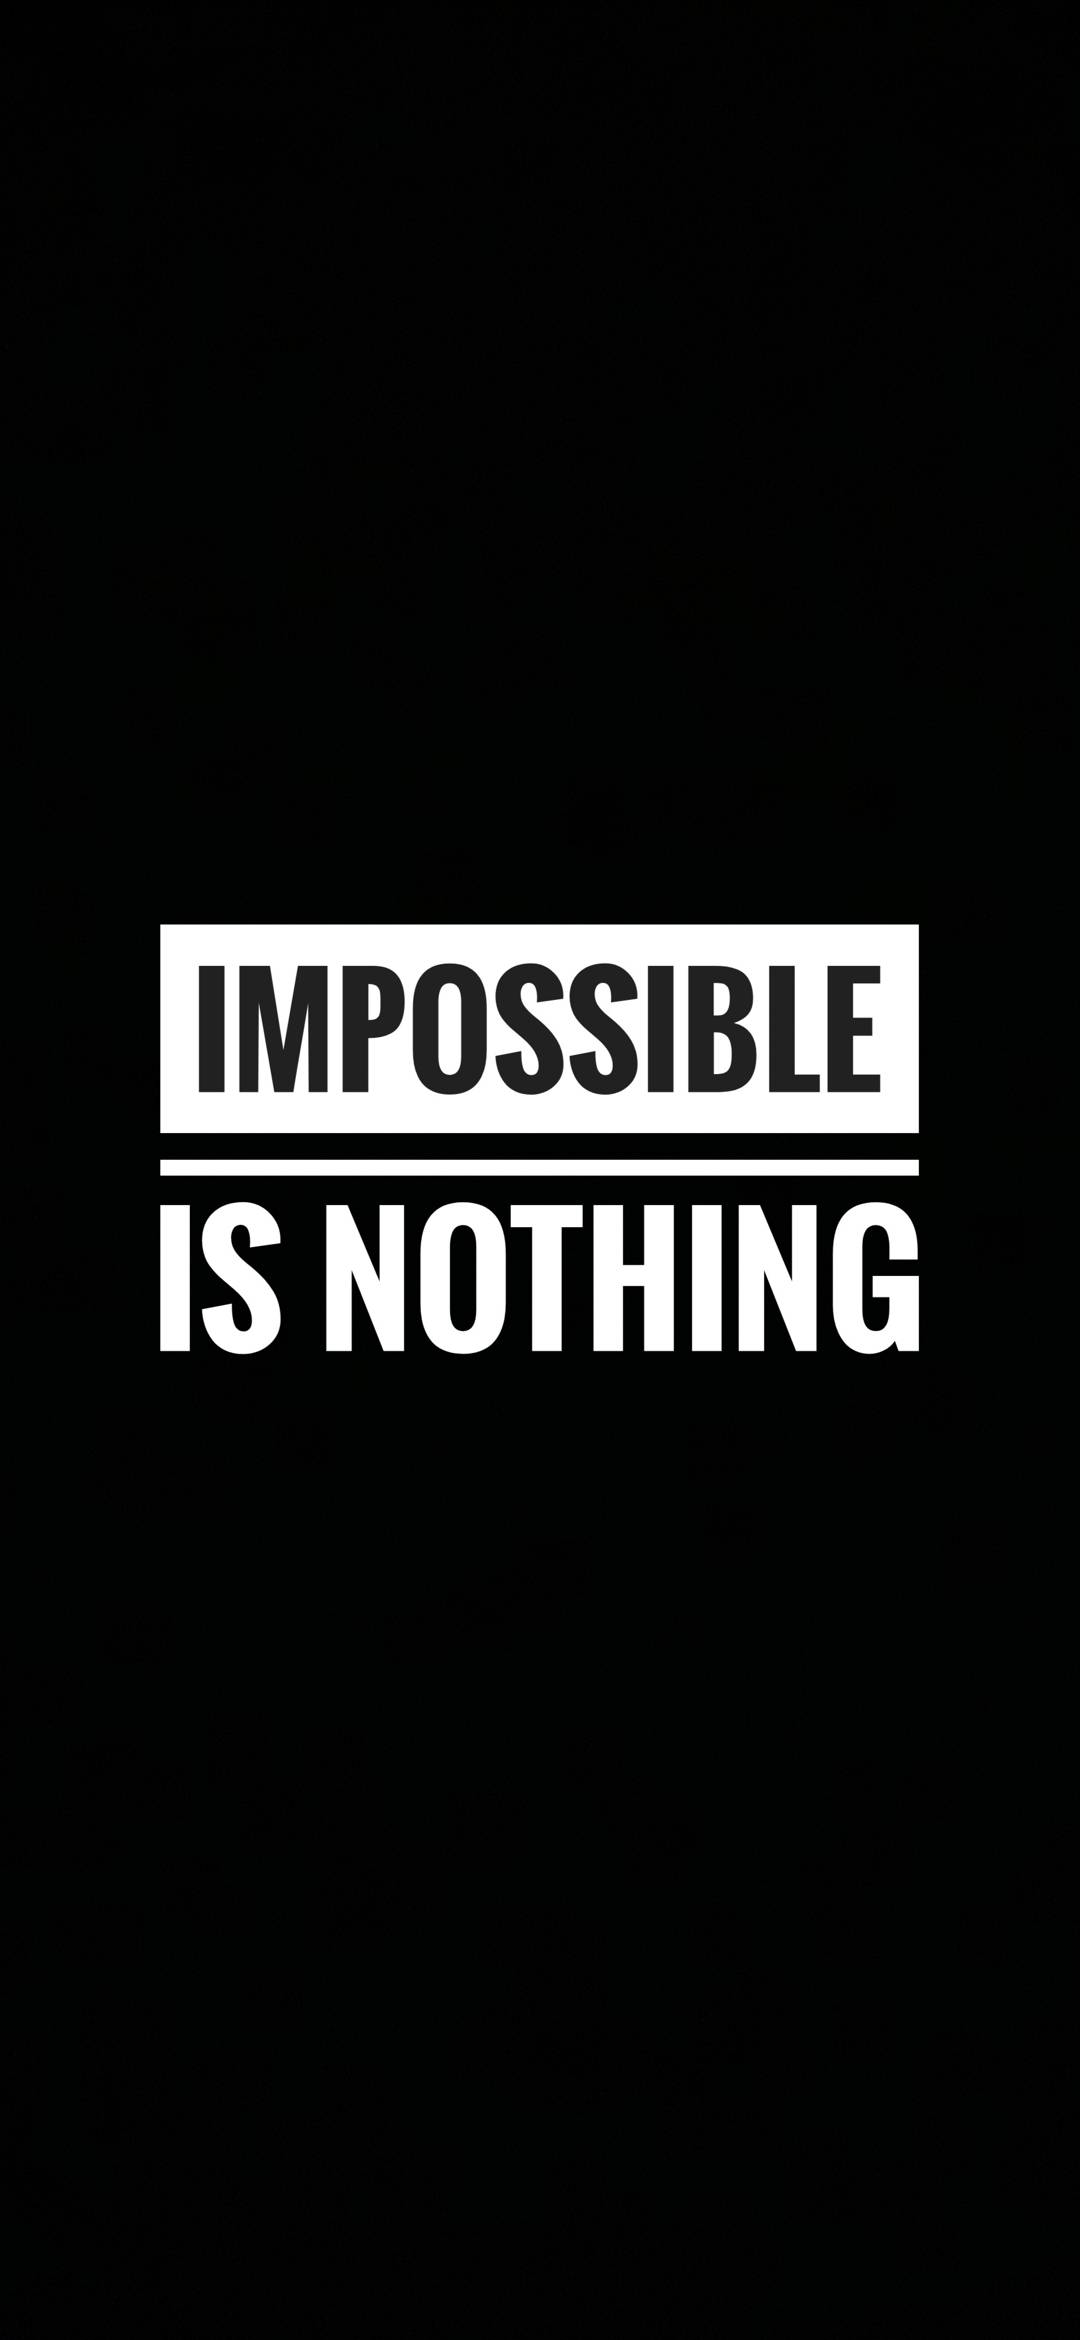 Nothing Impossible Motivational Wallpaper - Poster - HD Wallpaper 